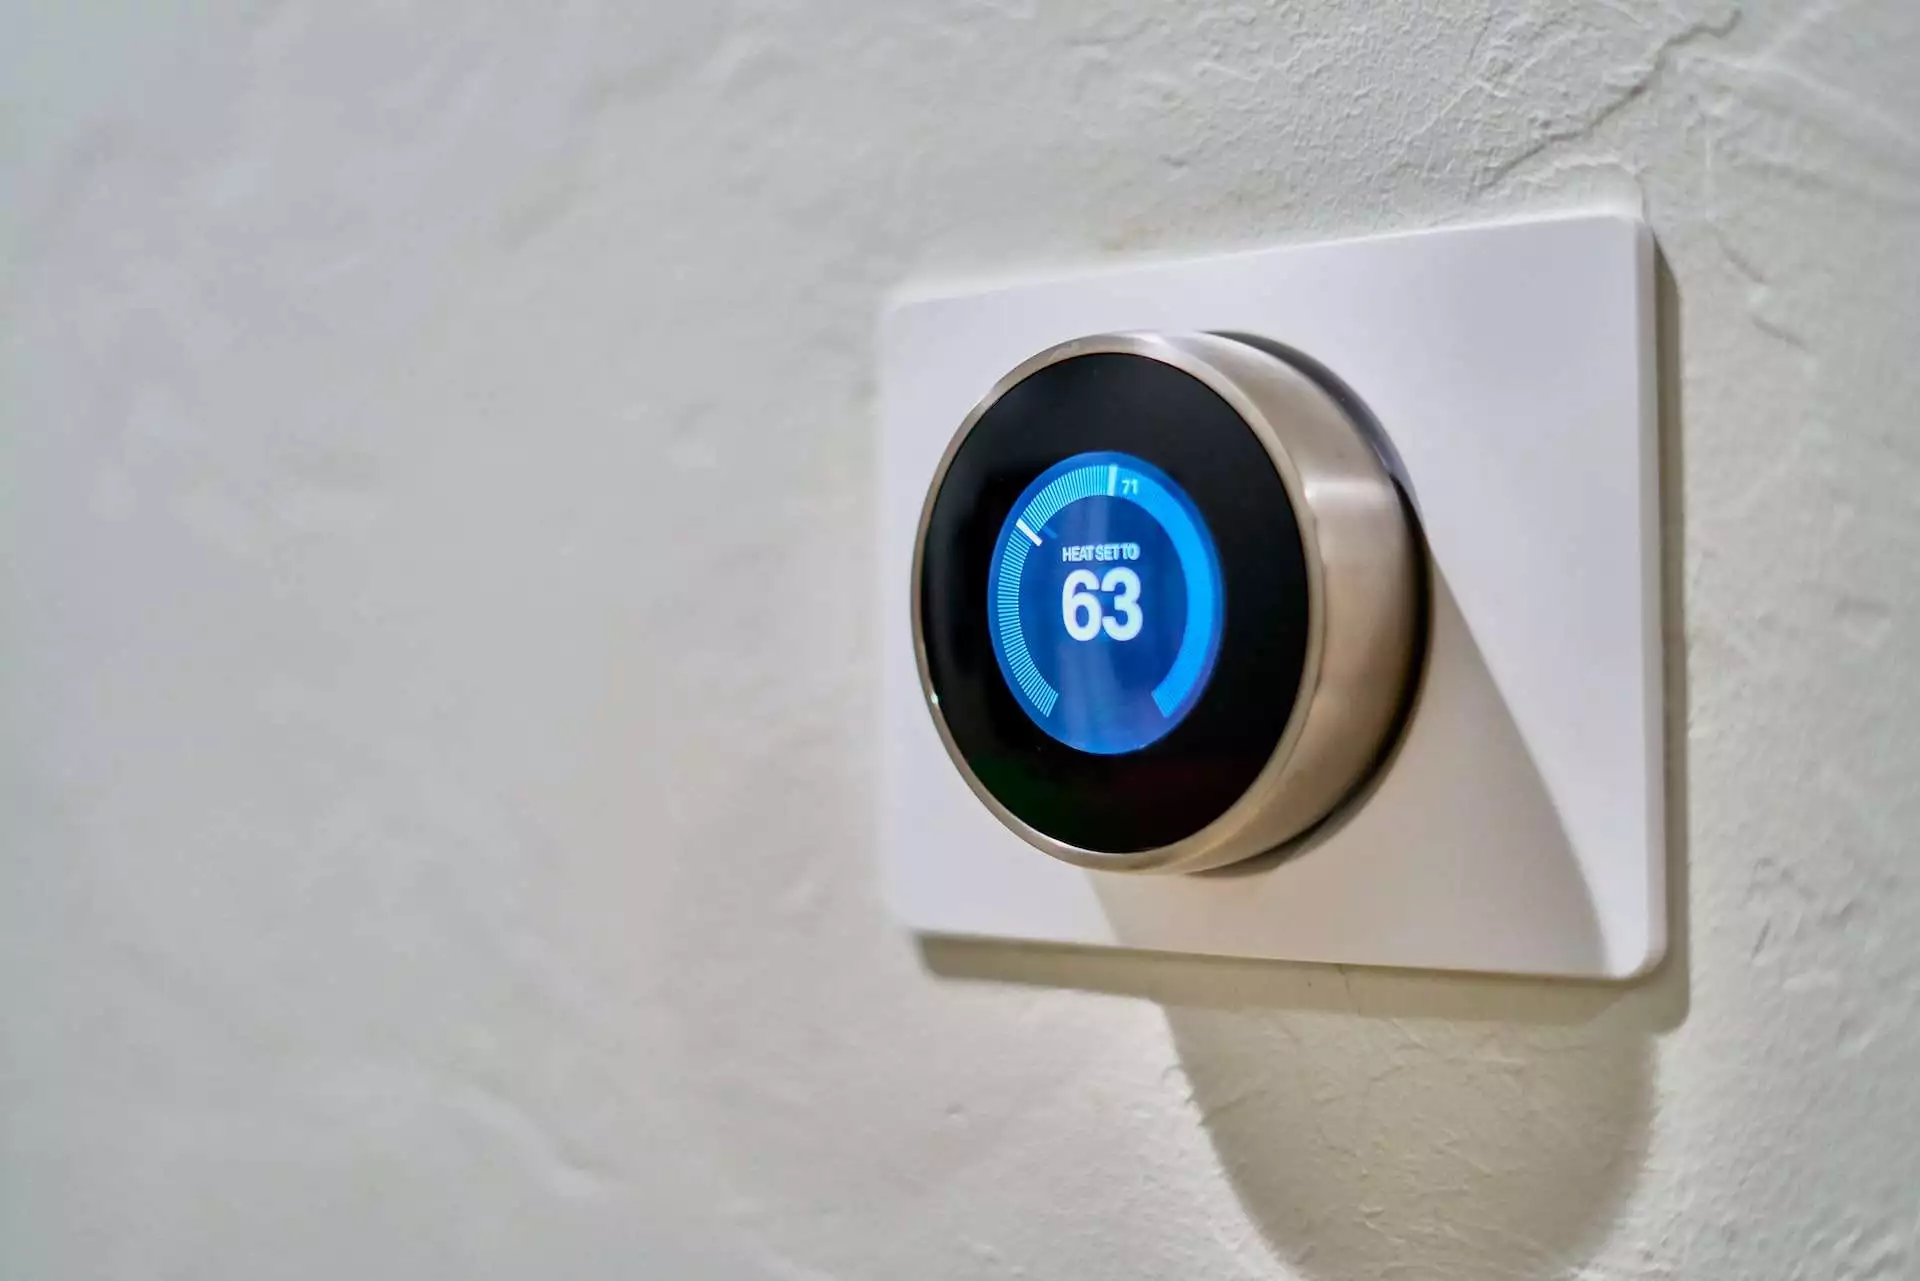 How to Factory Reset Nest Thermostat?